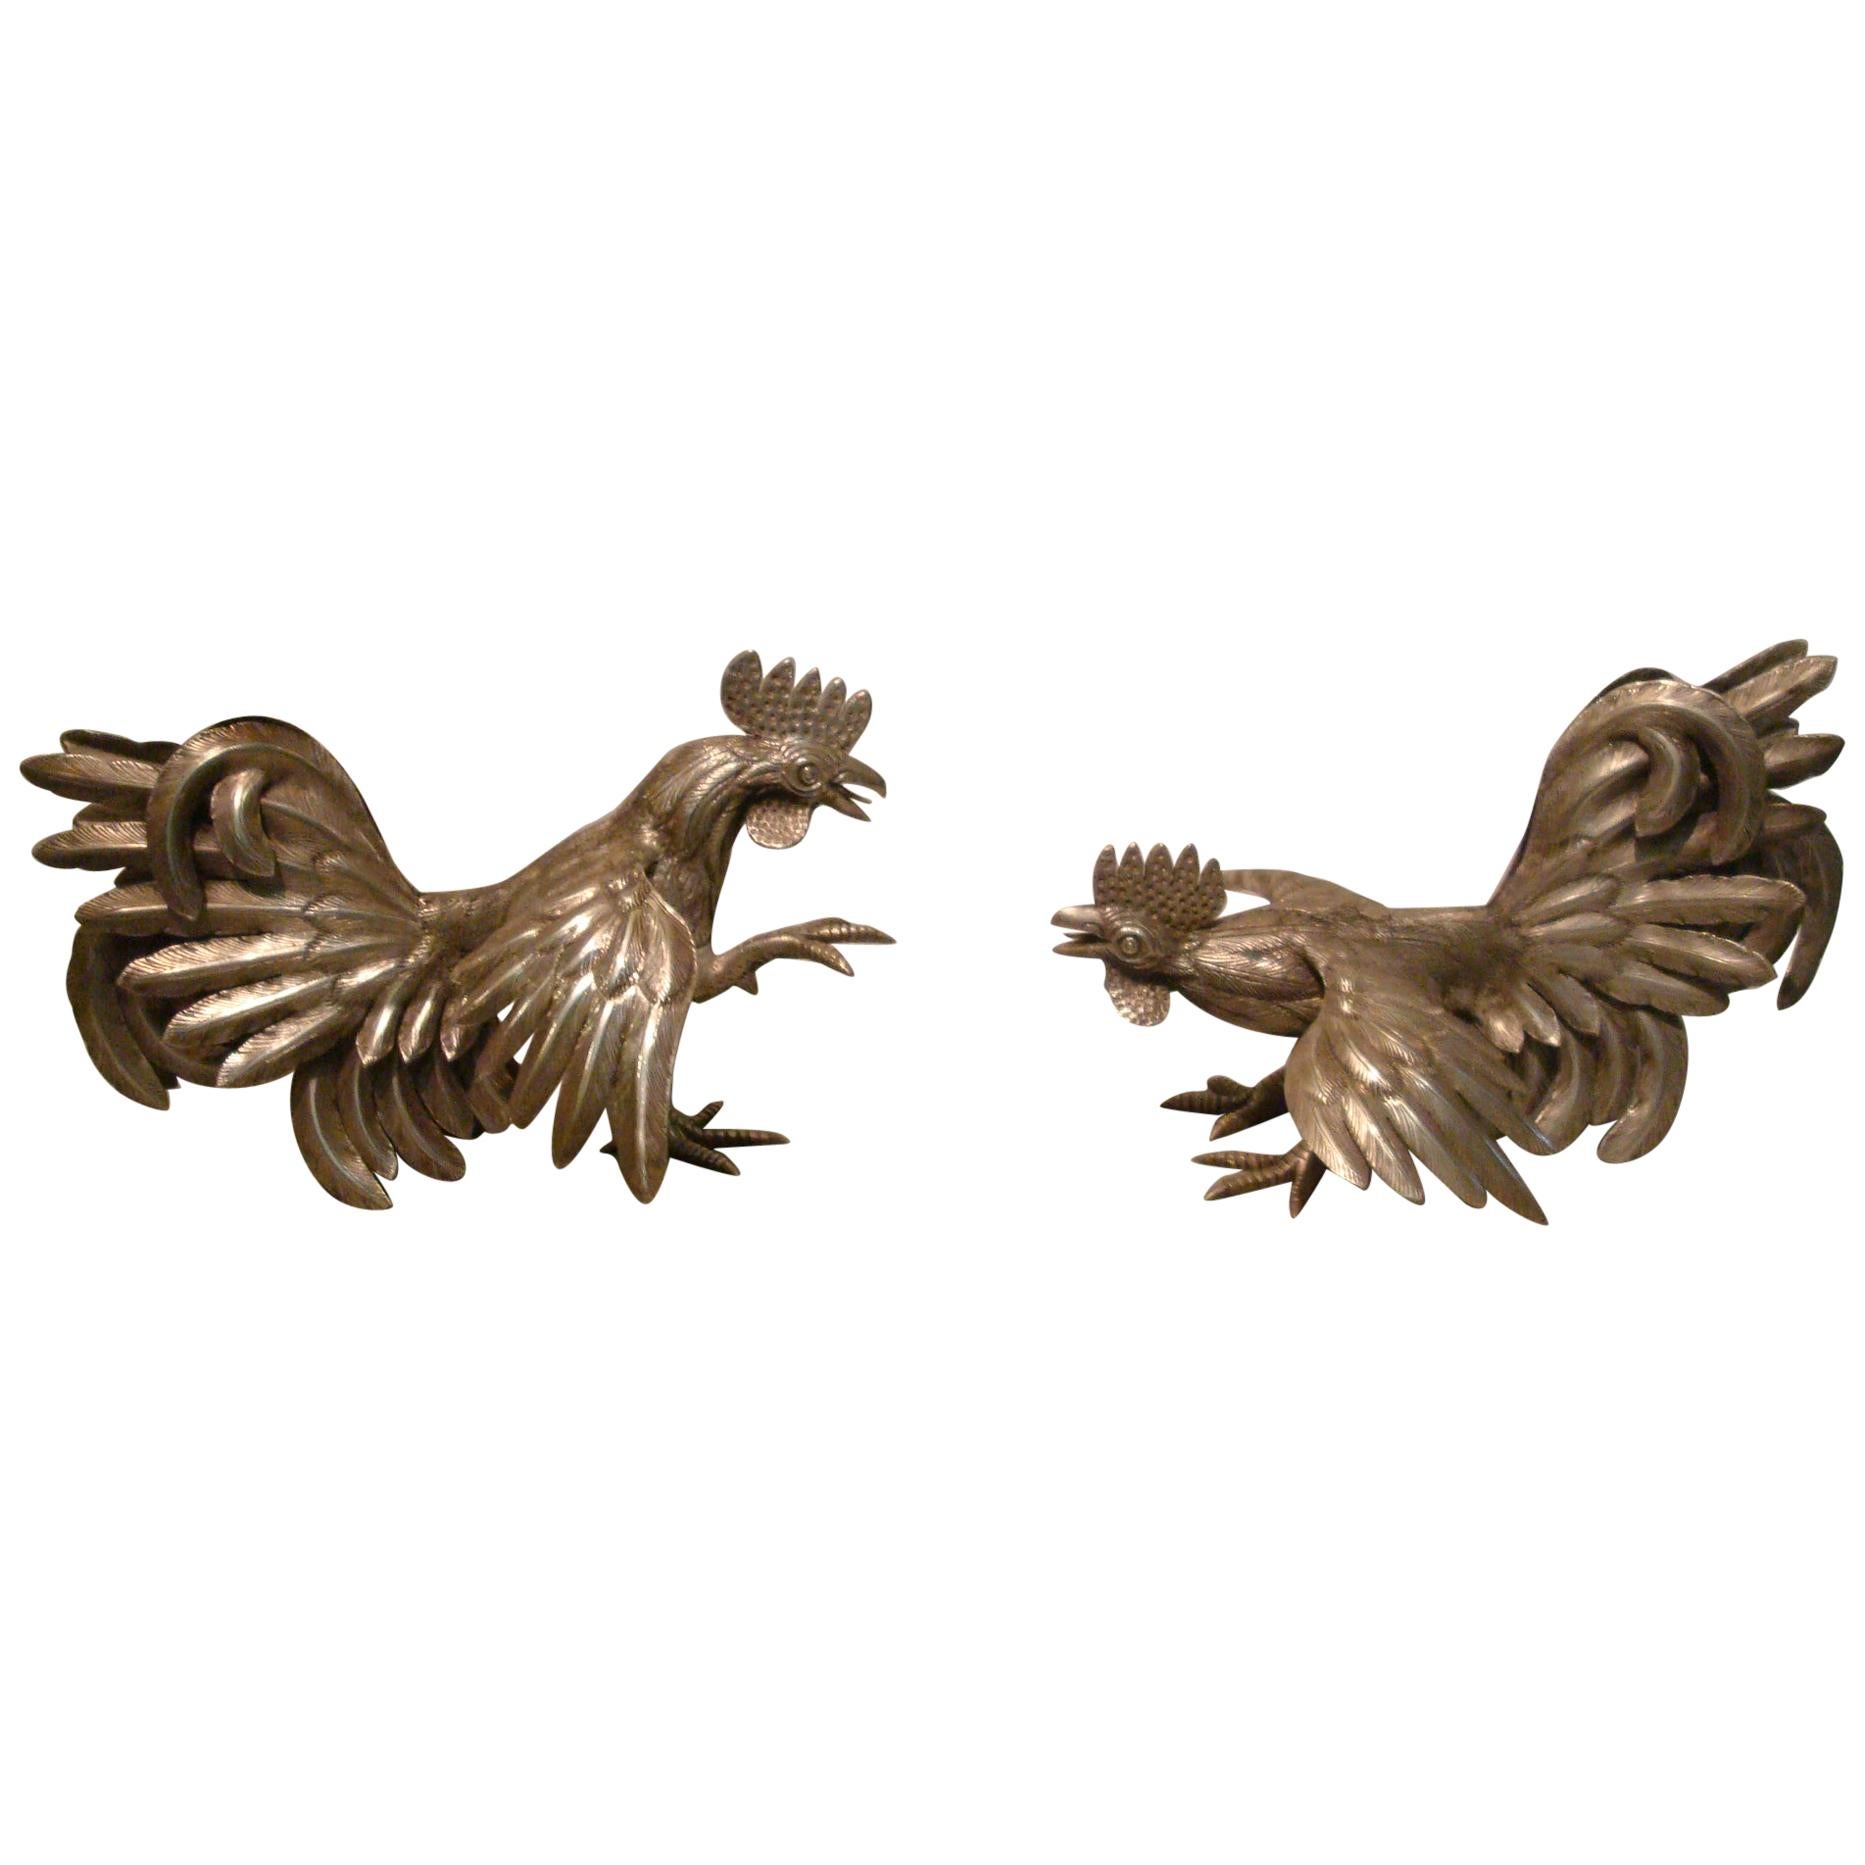 Pair of Antique Solid Silver Cockerels or Roosters in an Attitude of Fighting